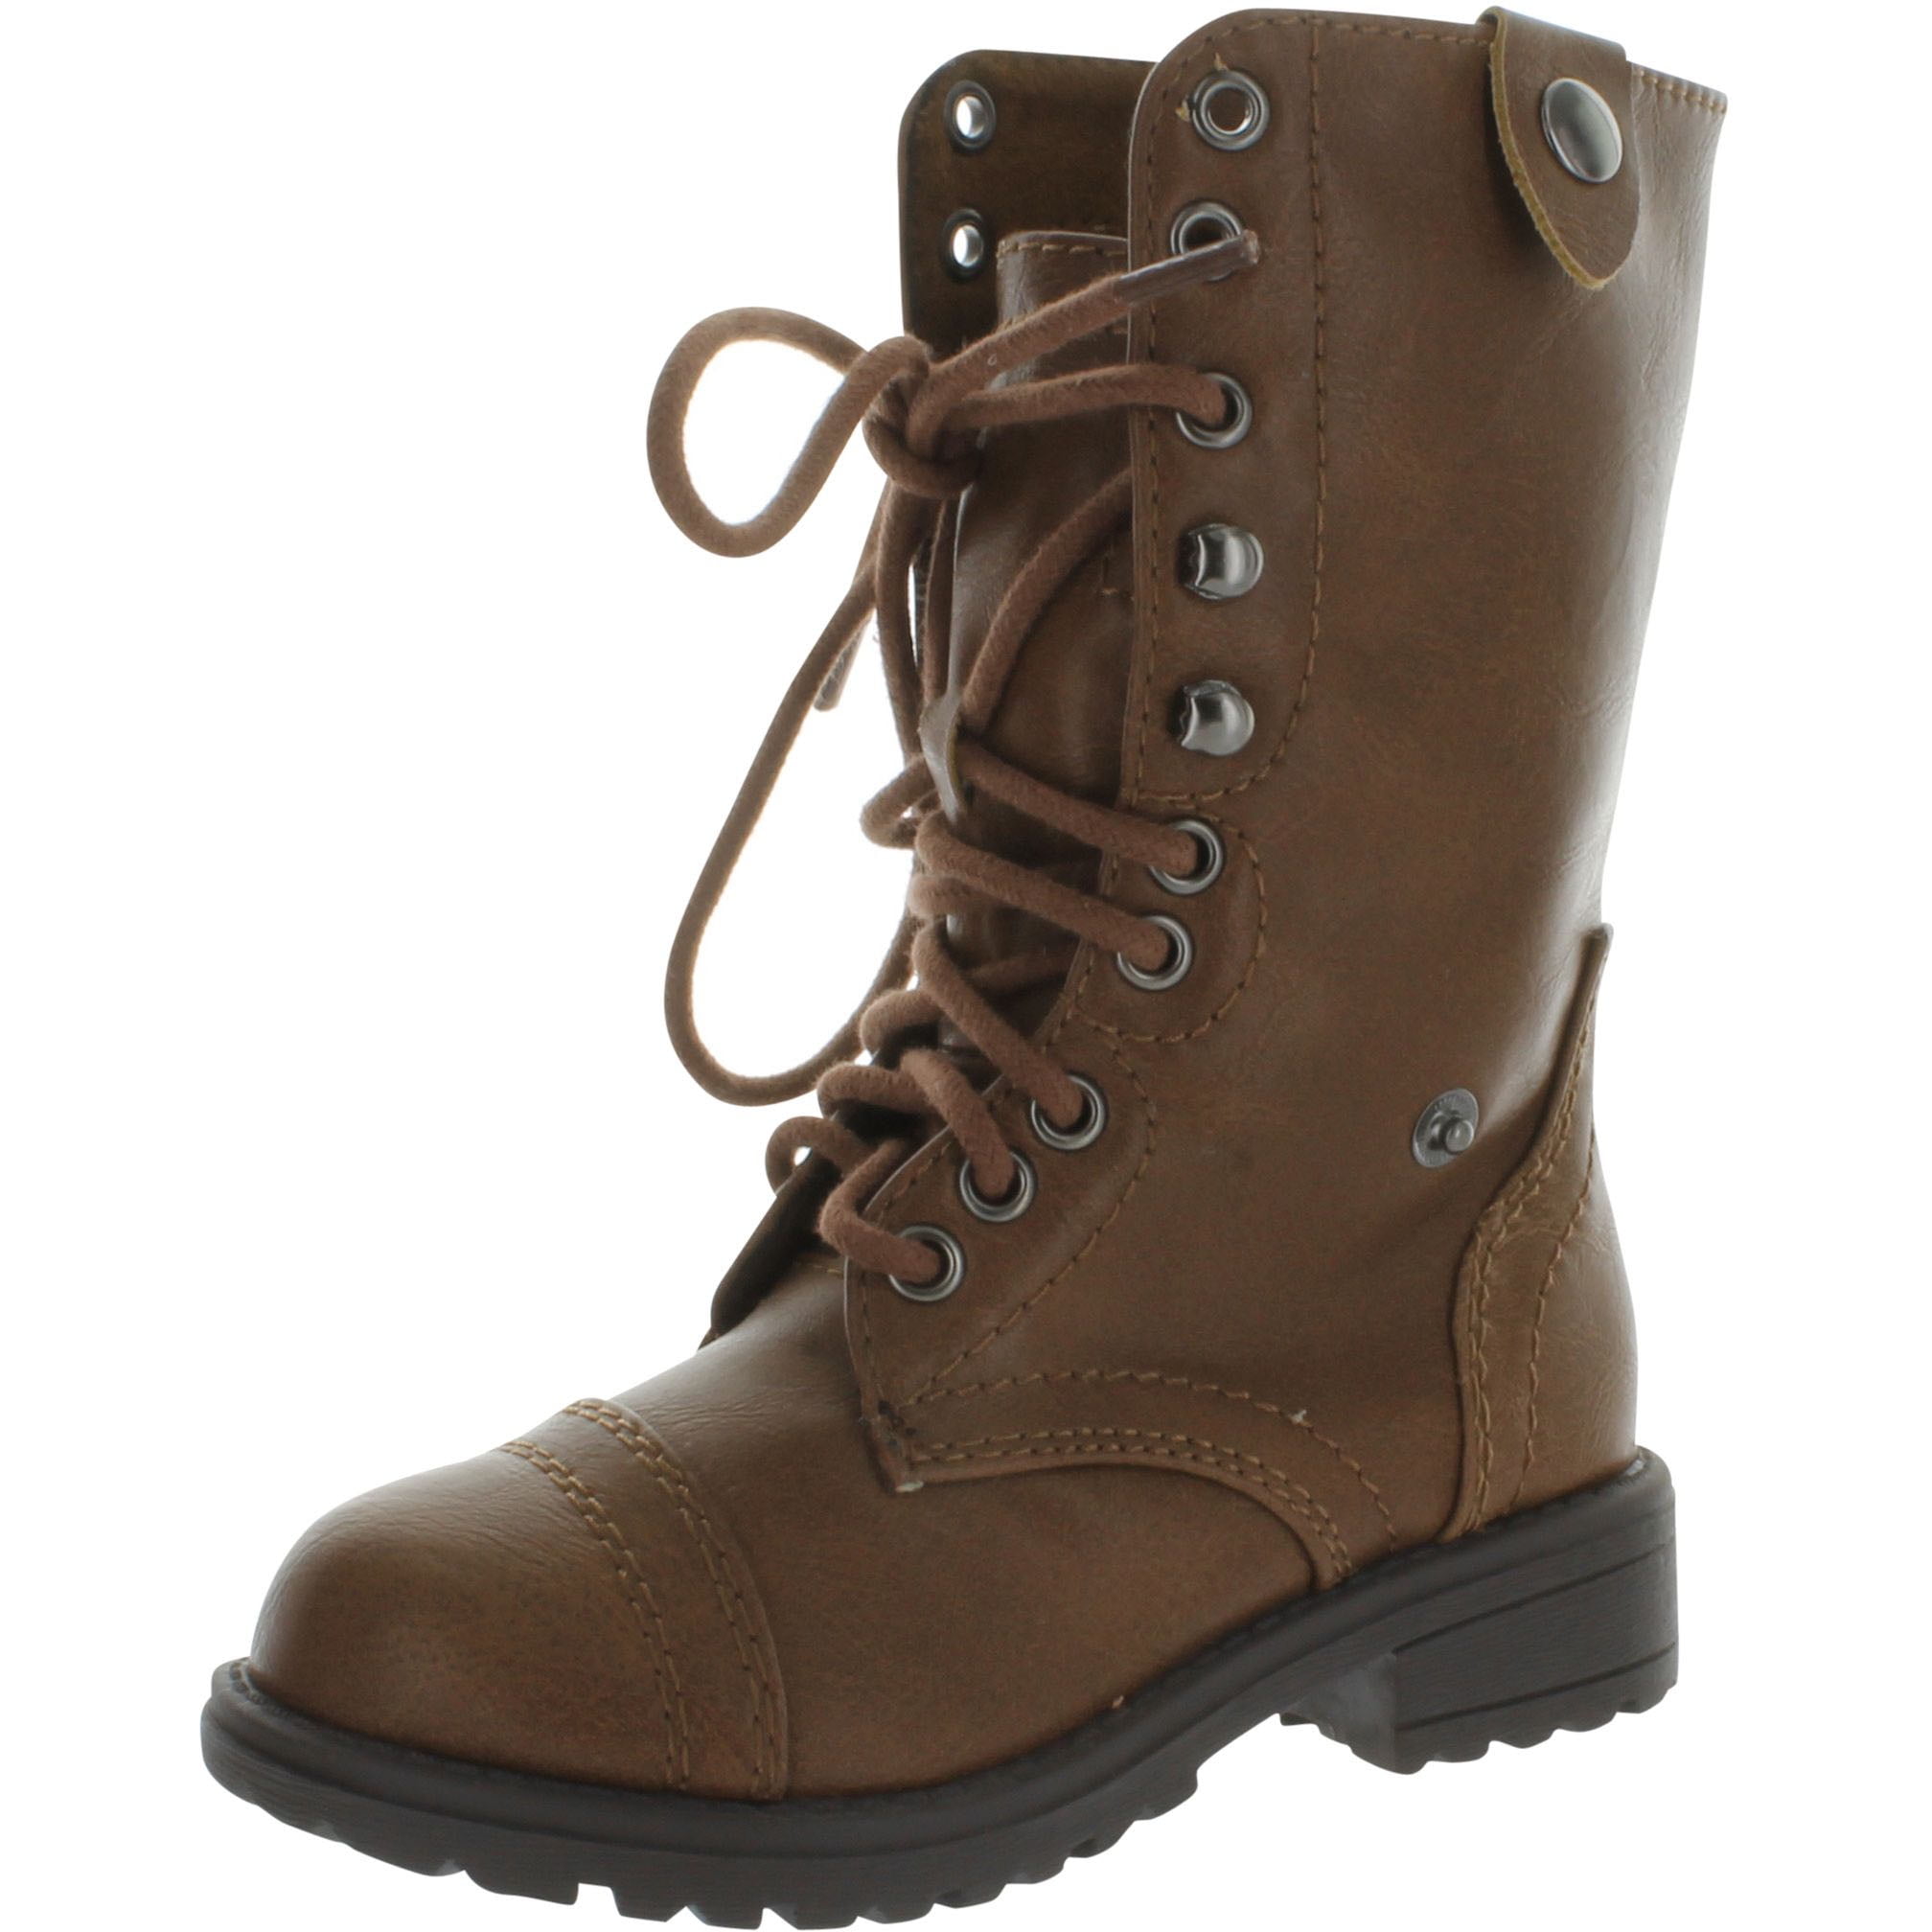 Oralee Combat Military Boots with Camo 